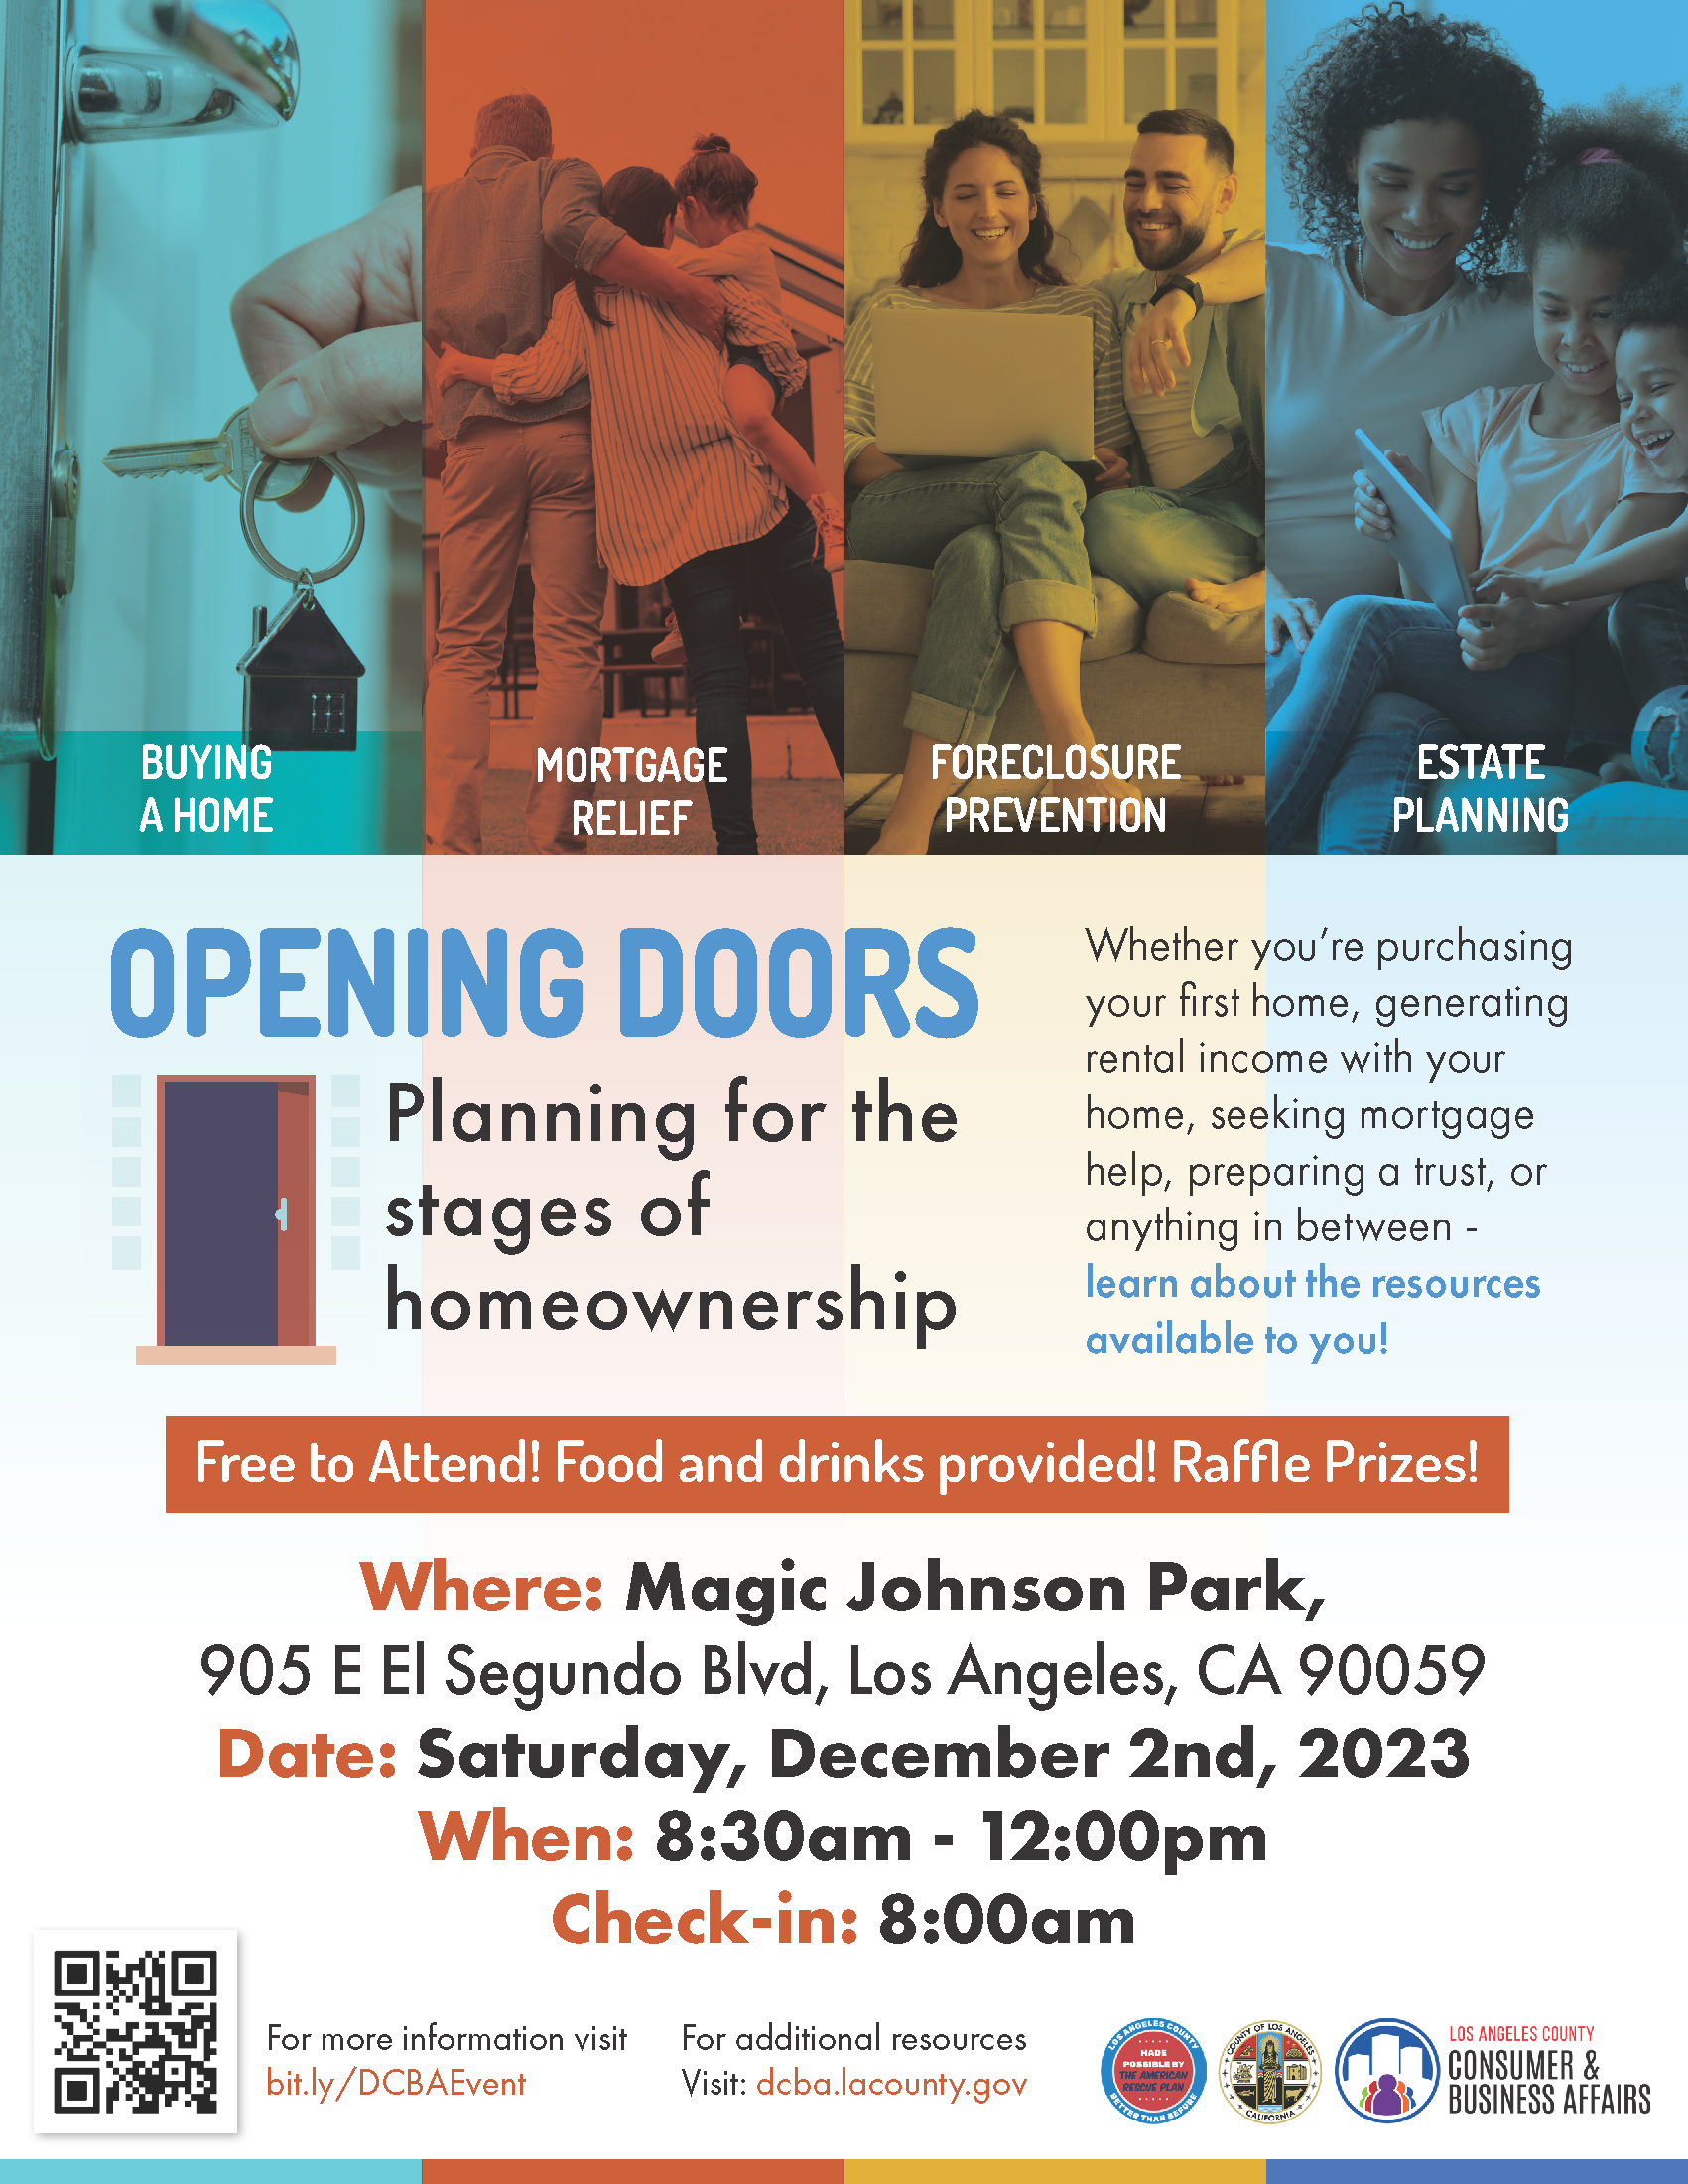 Opening Doors: Planning for the Stages of Homeownership. Saturday, Dec. 2, 2023 at Magic Johnson Park. Free to attend.